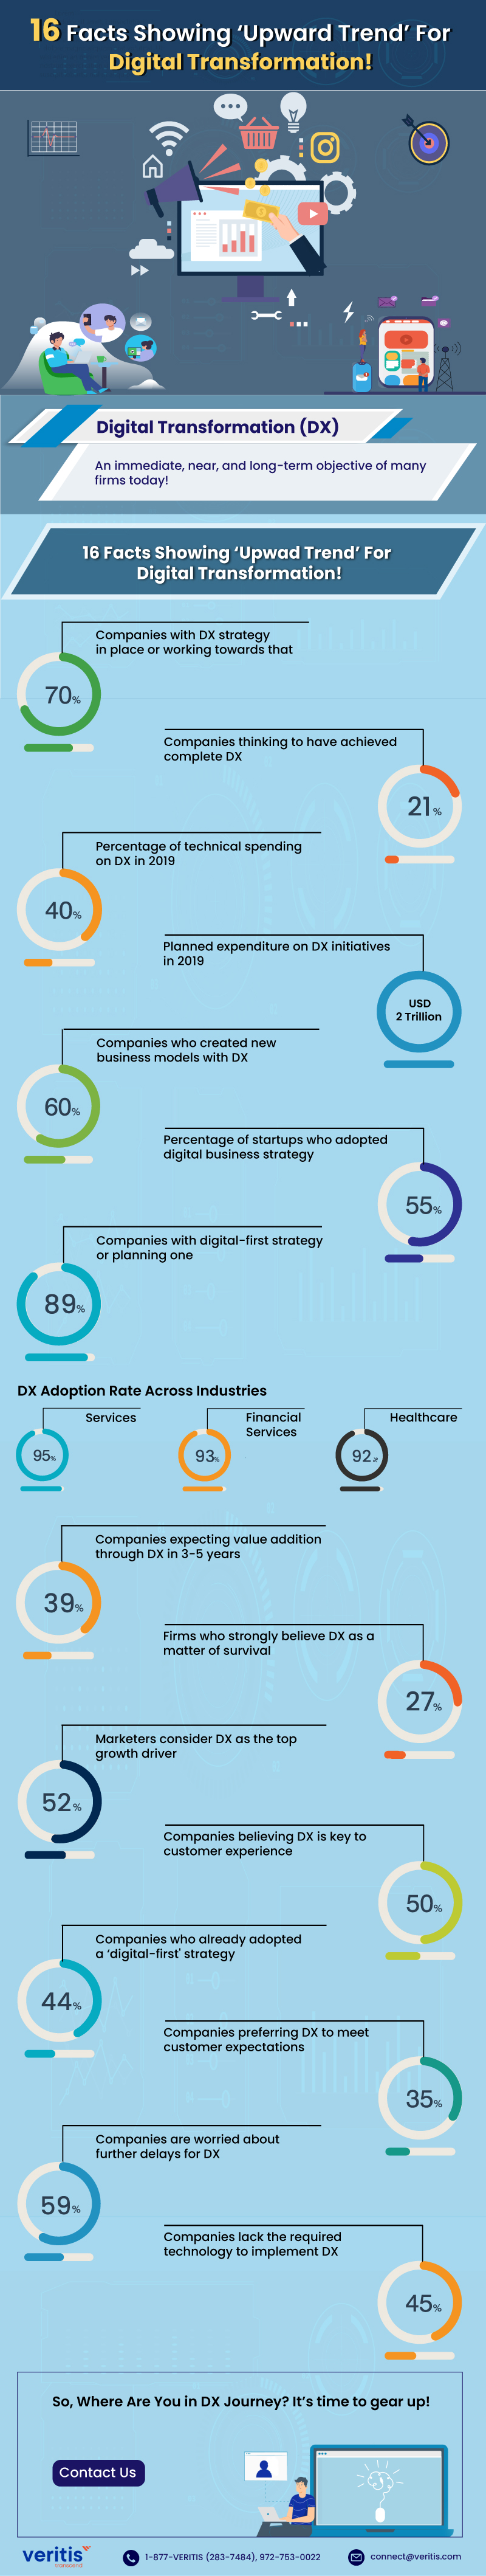 16 Facts Showing ‘Upward Trend’ For Digital Transformation! IT Infographic